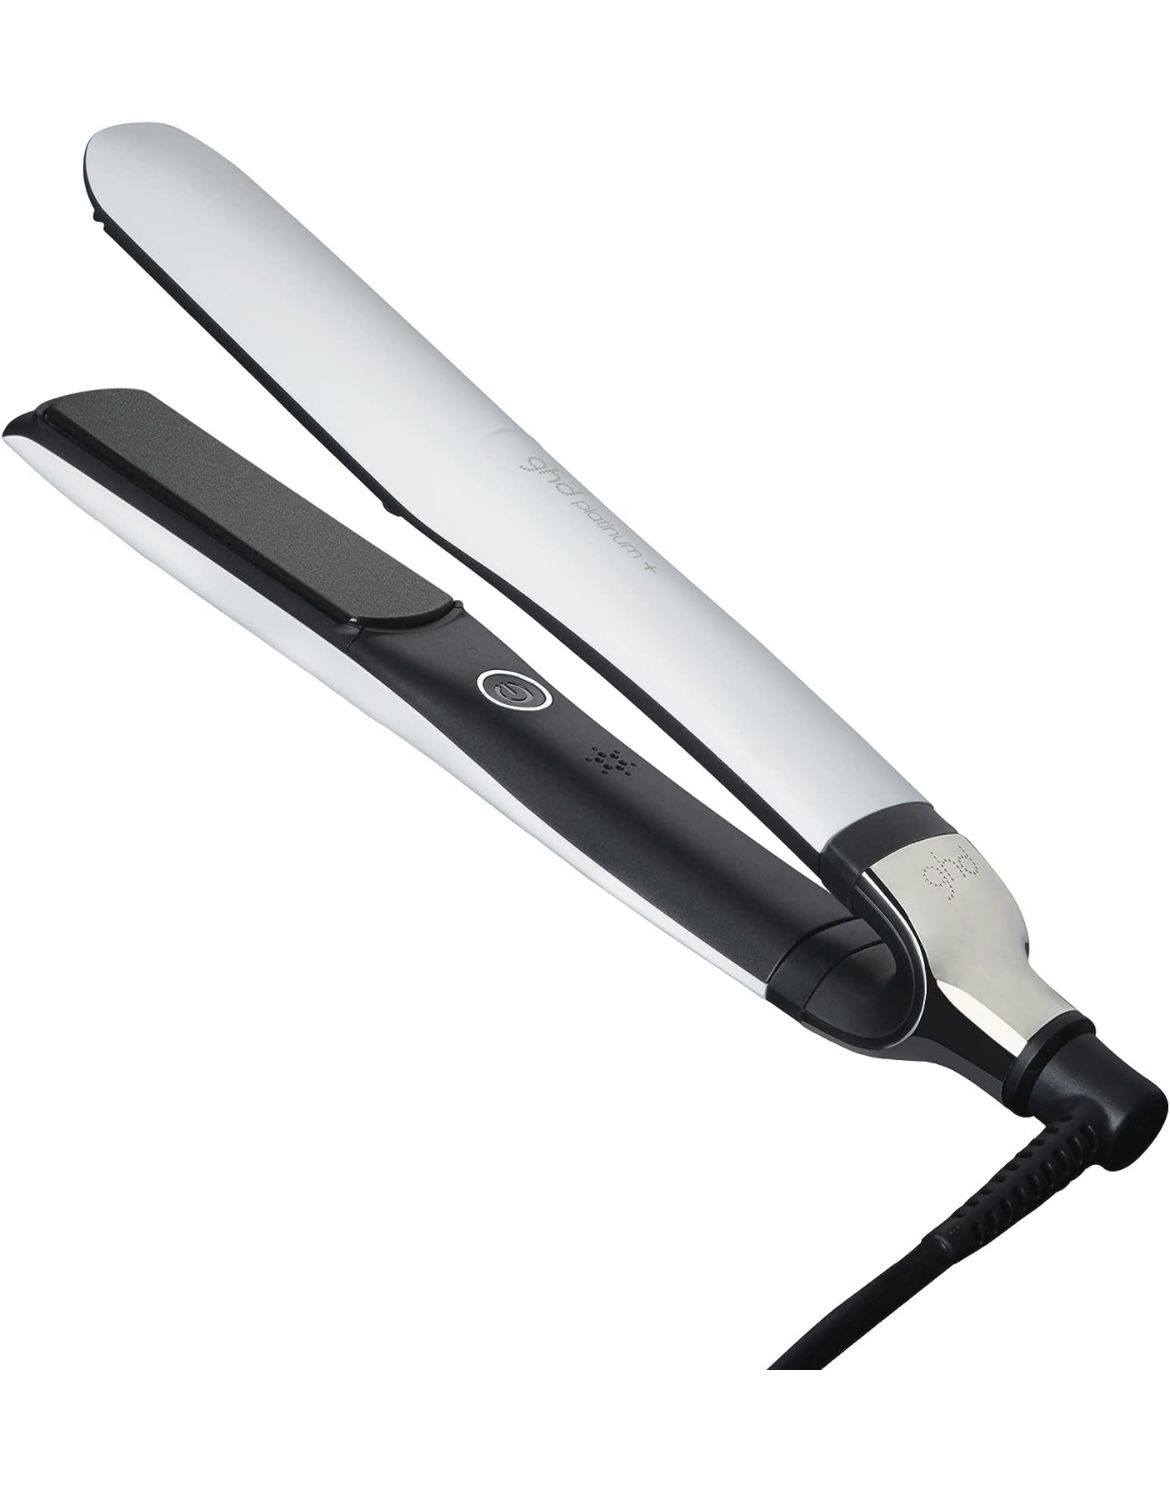 ghd Platinum+ iron | 1 Inch Flat Iron, Ceramic Straightening Iron, Professional Hair Styling Tool for Stronger Hair, More Shine and More Color Protect